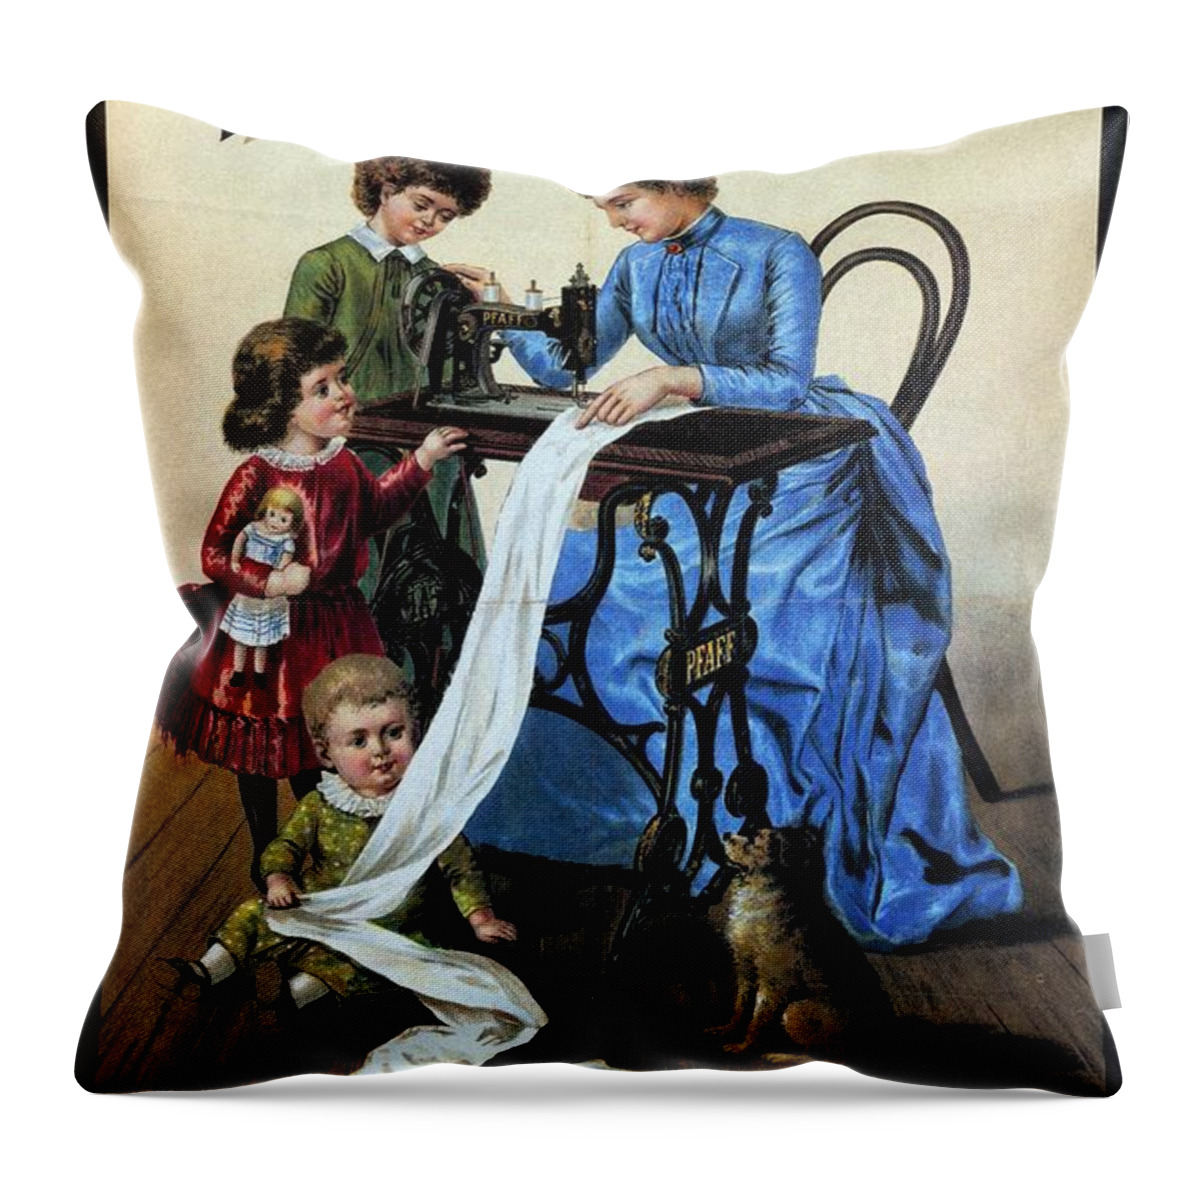 Vintage Throw Pillow featuring the mixed media Pfaff - Sewing Machine - Vintage Advertising Poster by Studio Grafiikka